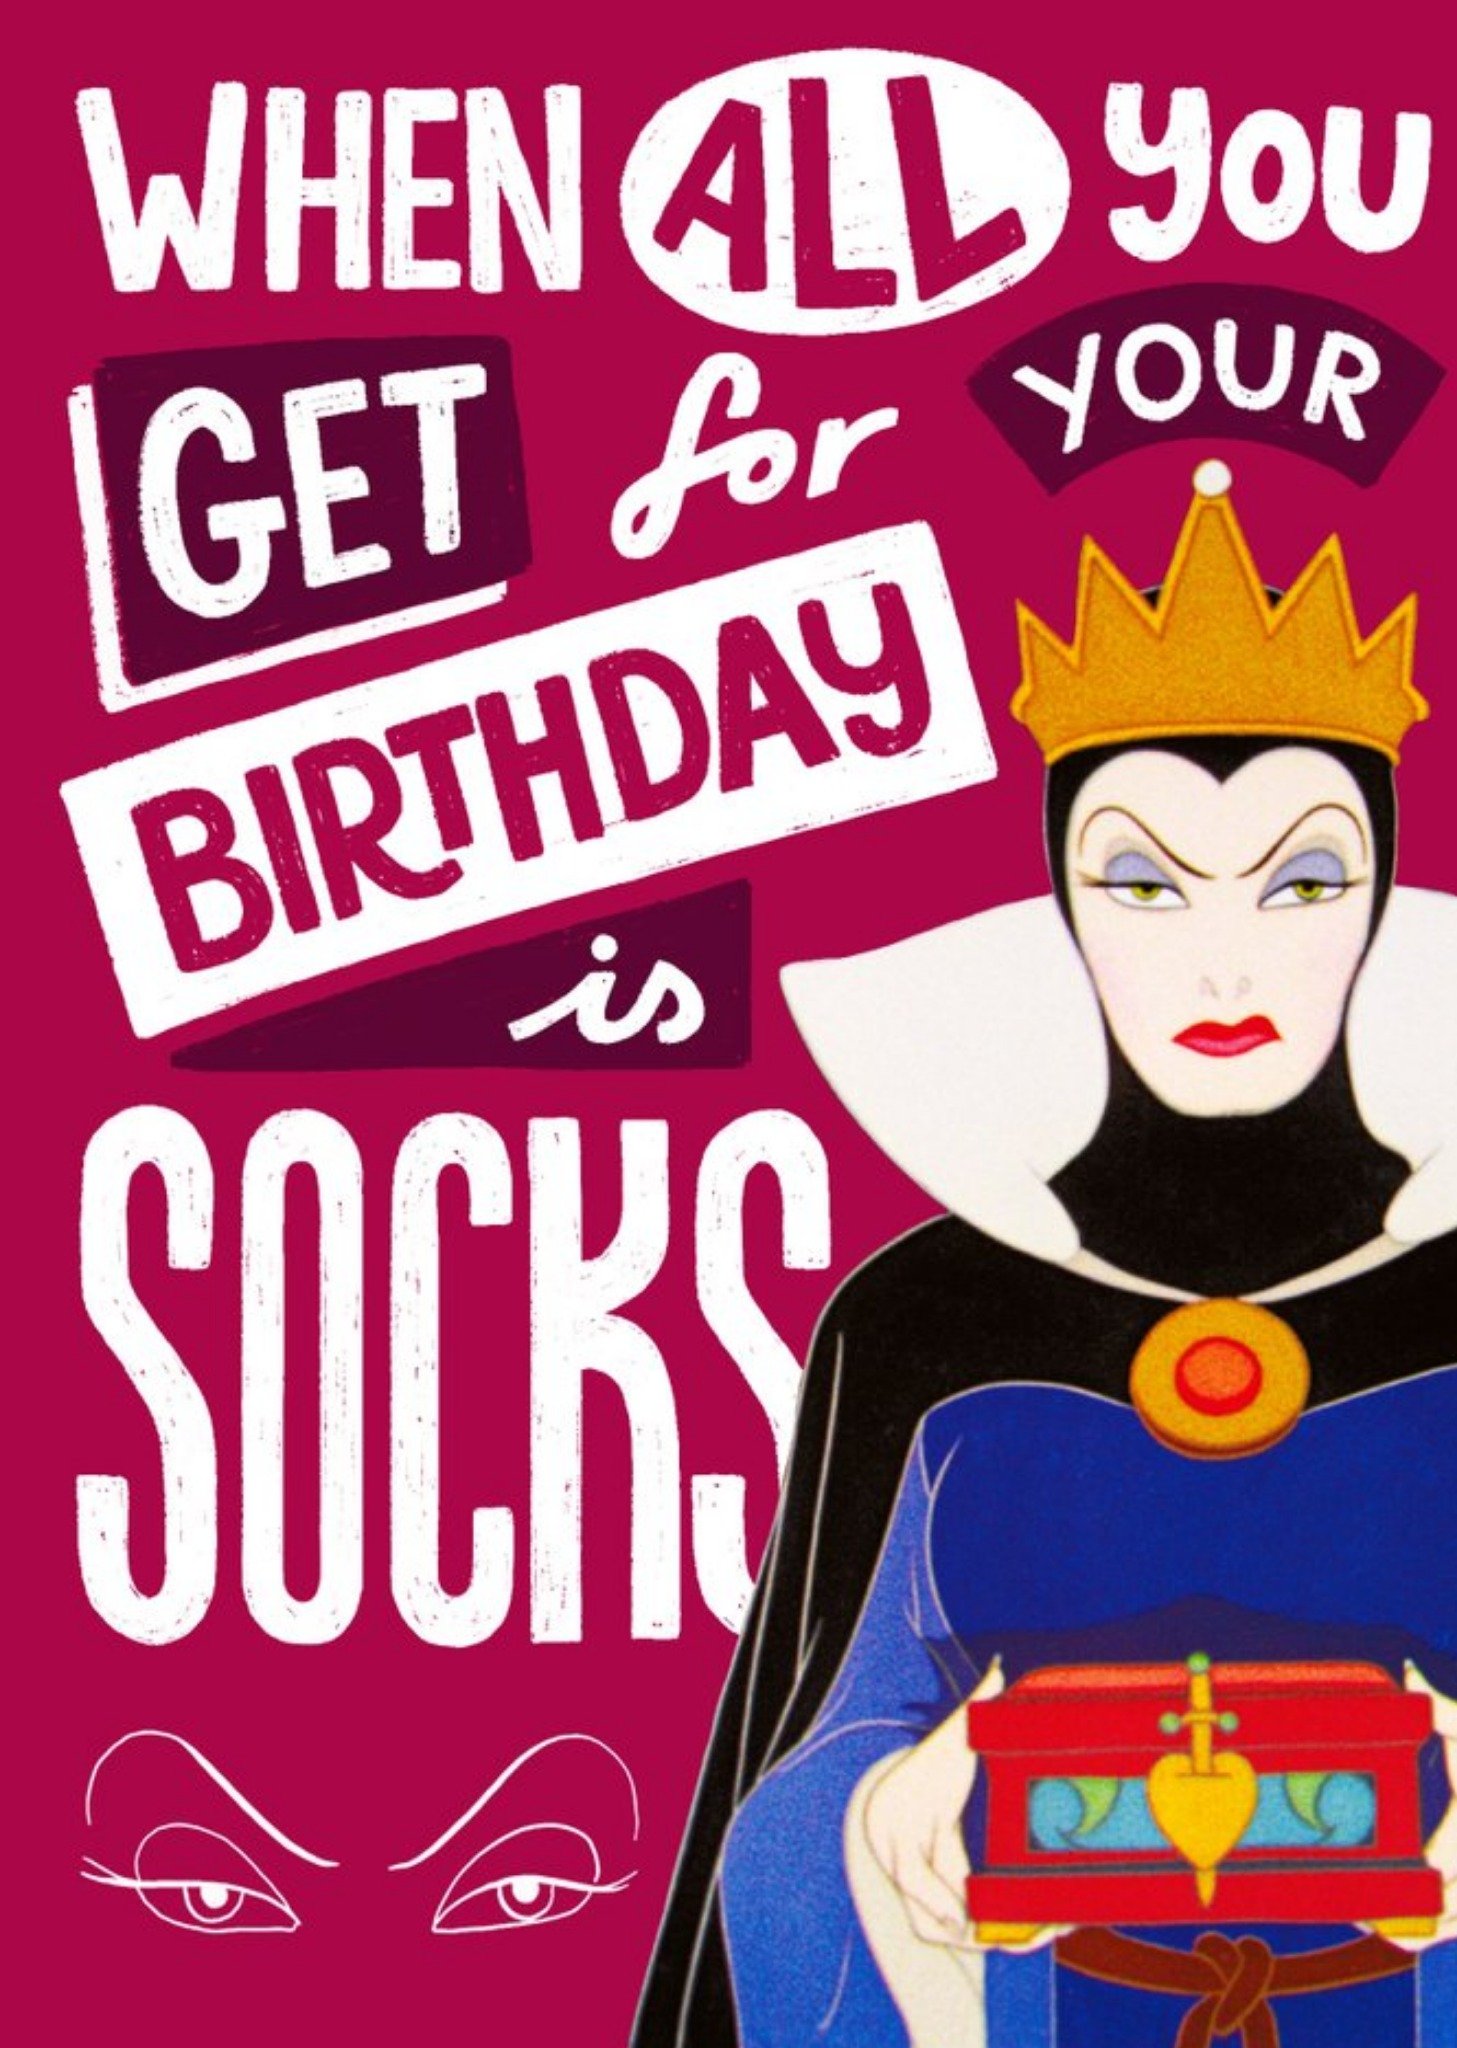 Disney Princesses Disney Snow White's Evil Queen All You Get Is Socks Funny Birthday Card, Large